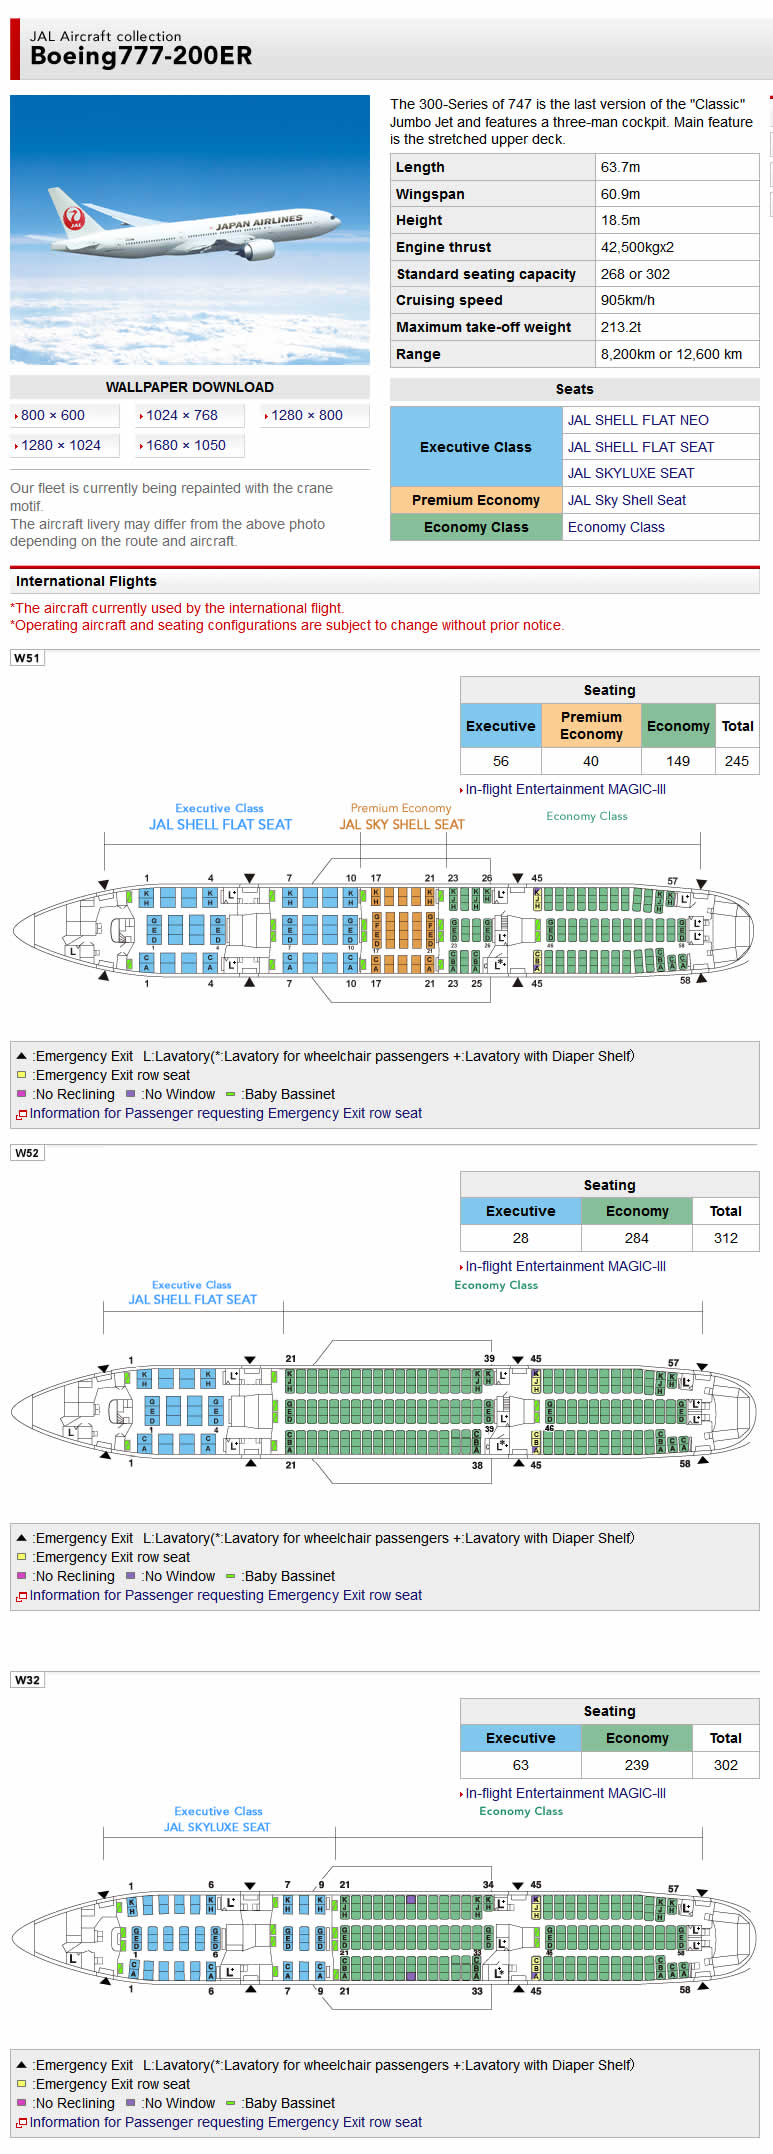 JAL JAPAN AIR AIRLINES BOEING 777-200ER AIRCRAFT SEATING CHART